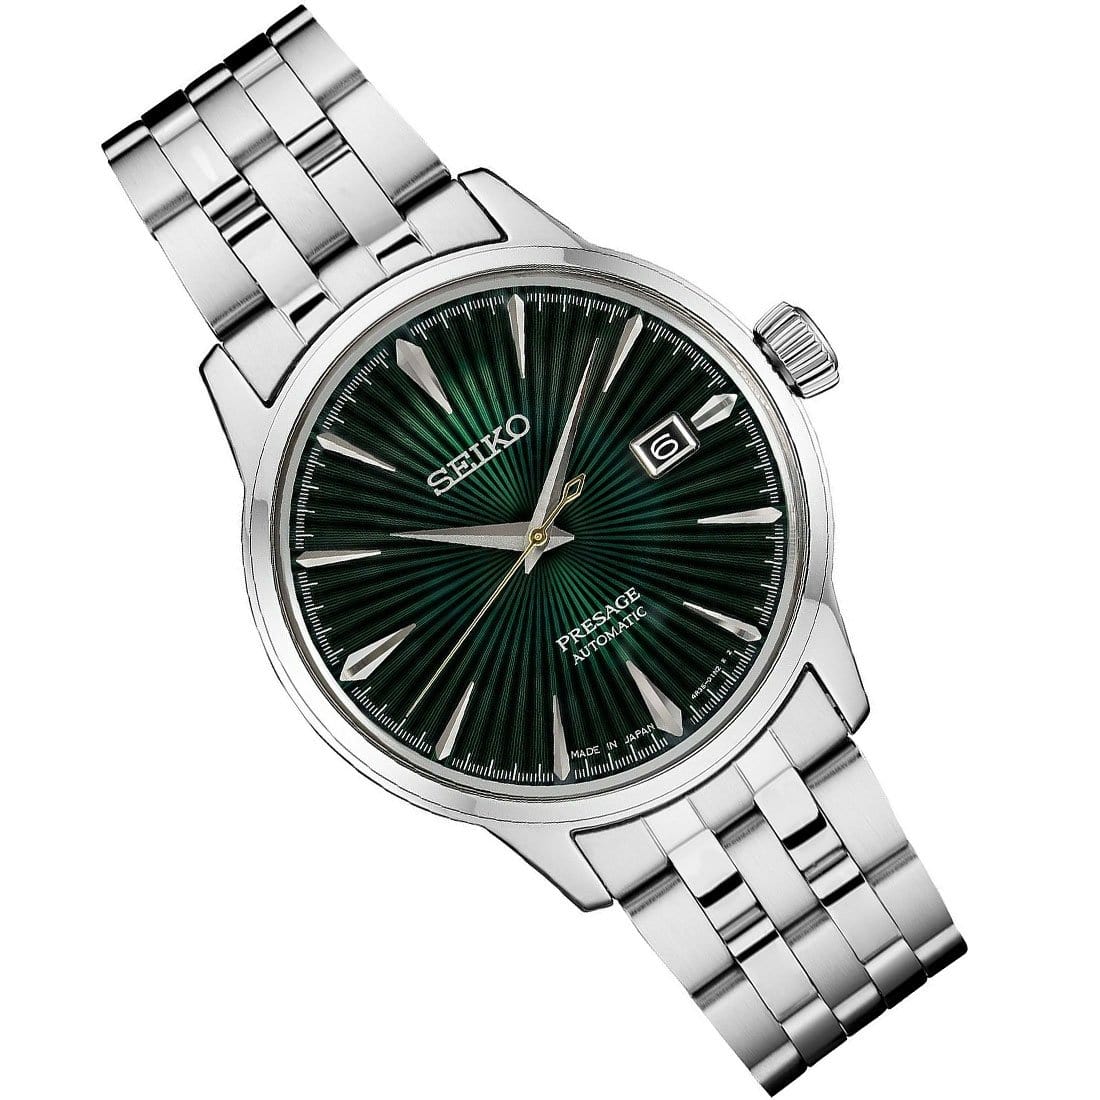 Seiko Presage Automatic Cocktail Time Made in Japan Watch SRPE15J1 SRPE15J SRPE15